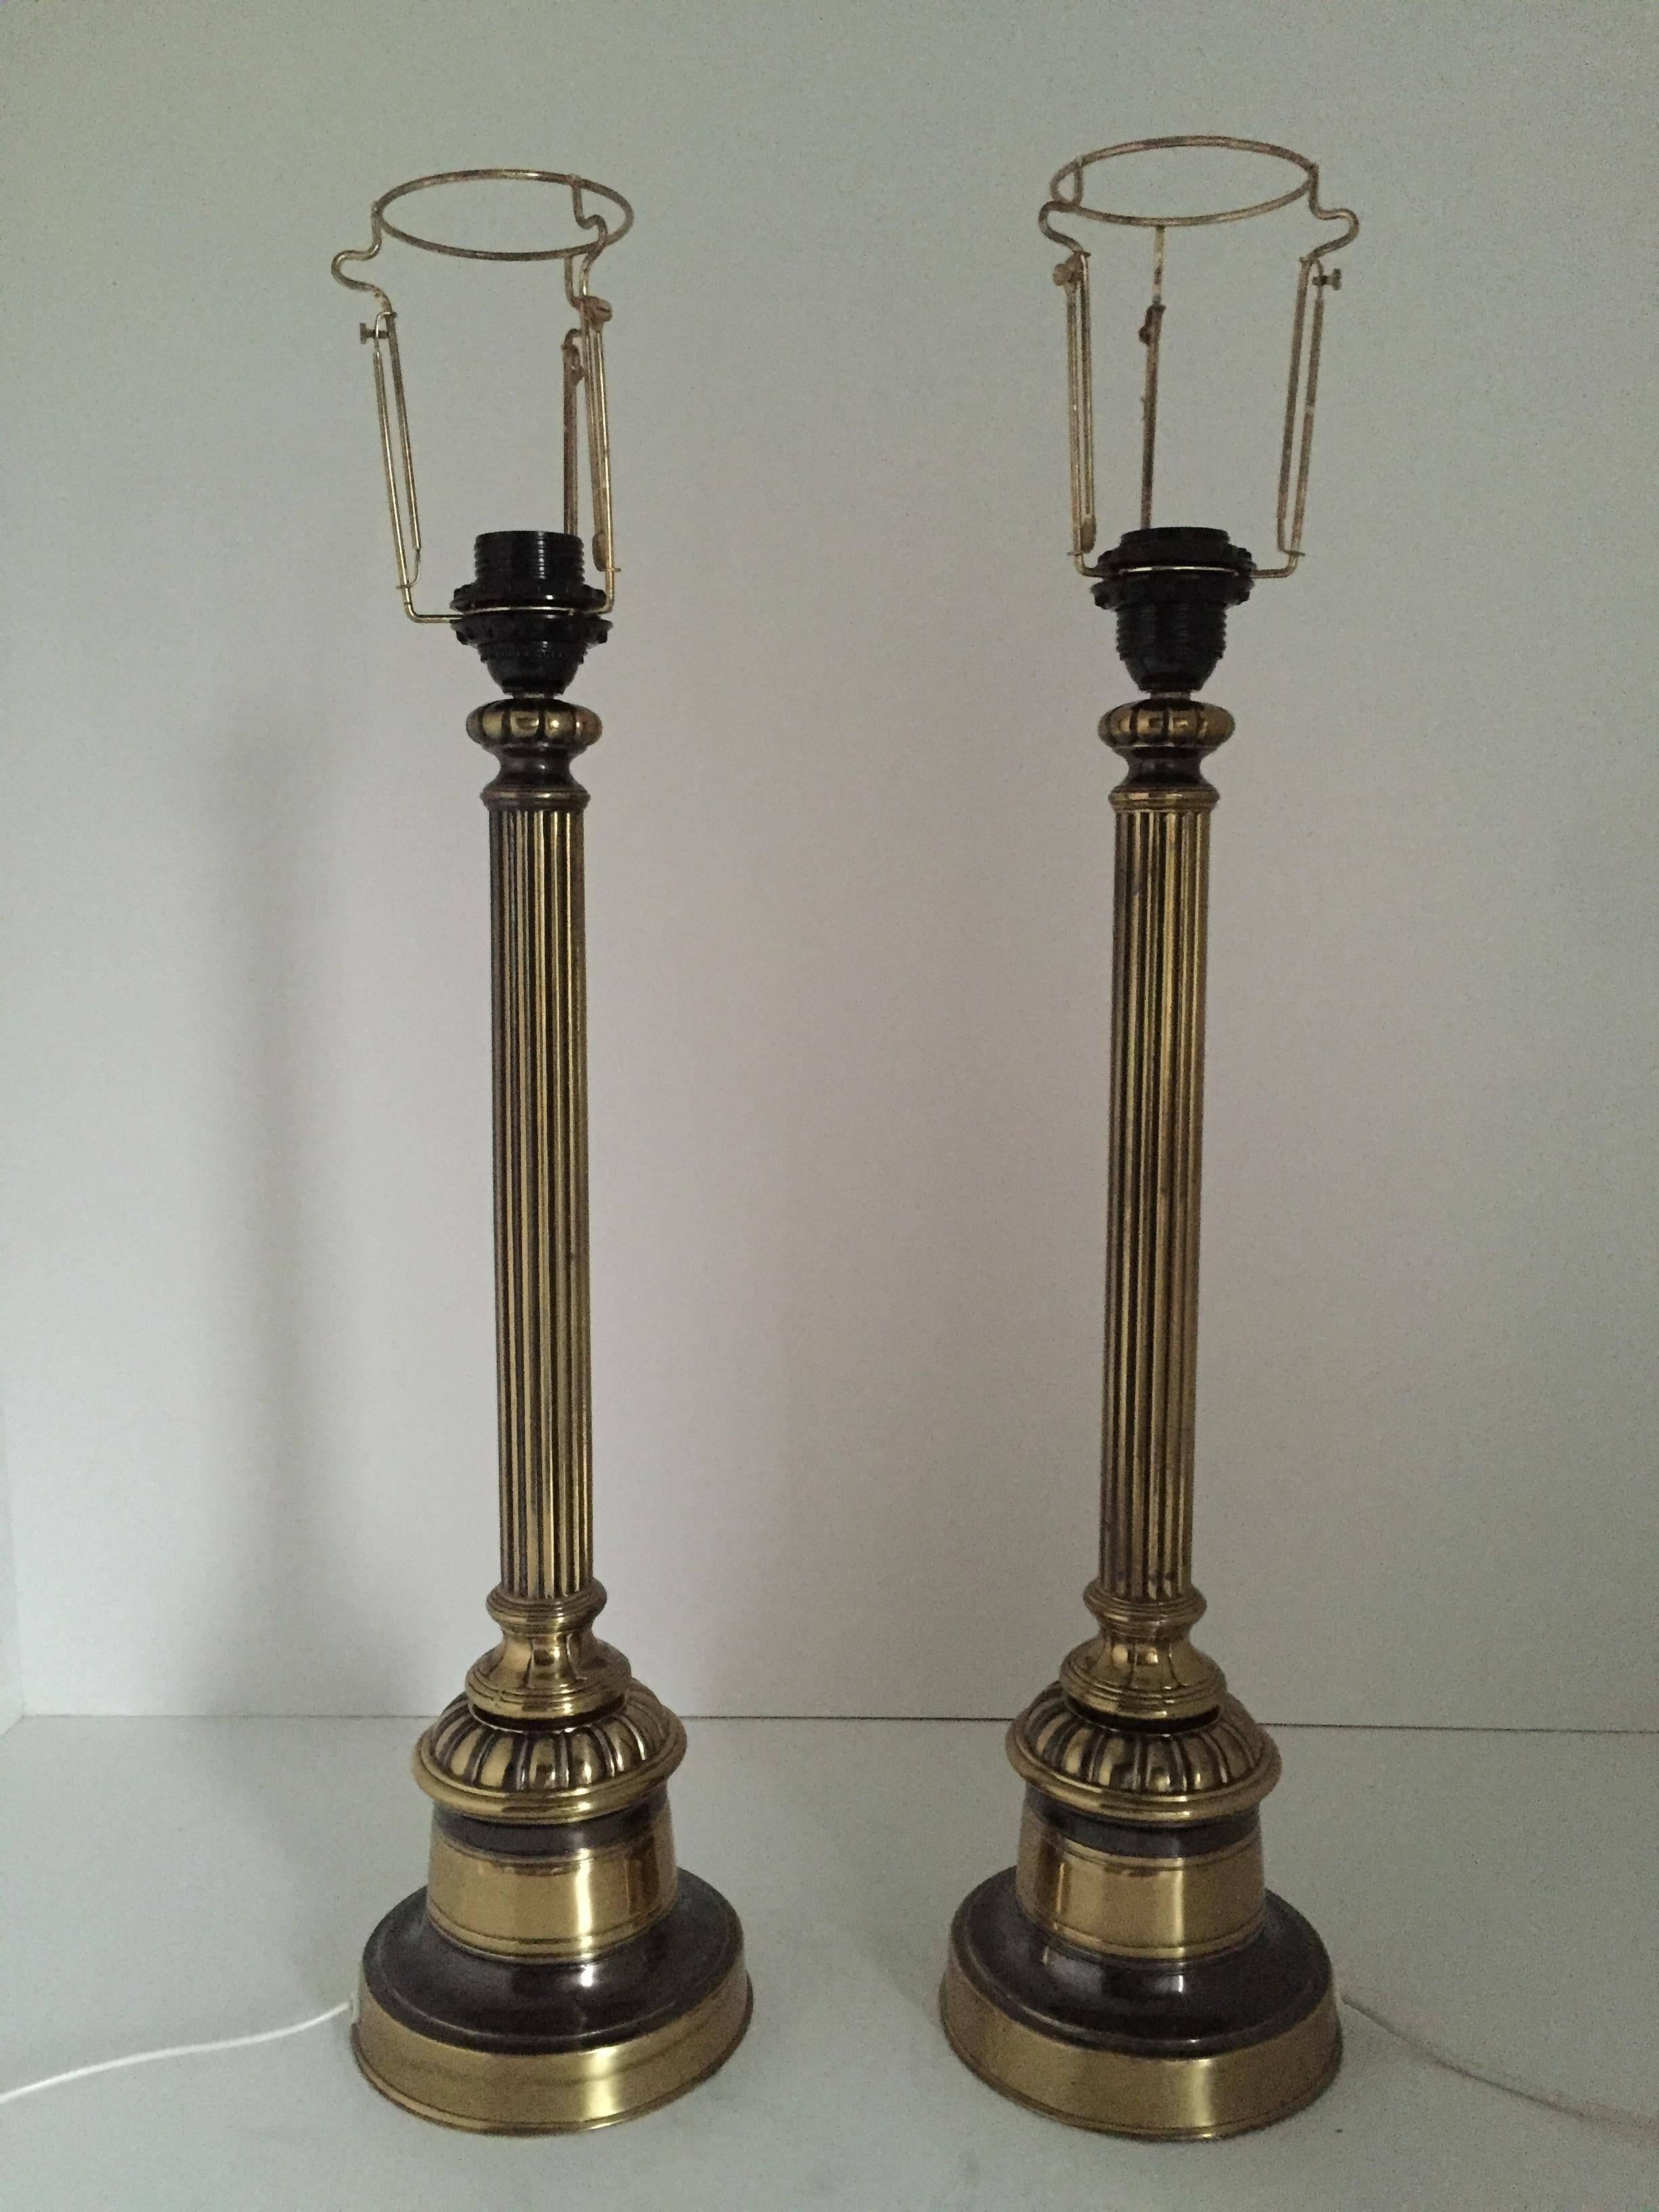 1935 Swedish Empire style pair of large brass and metal table lamps by Bergboms.
A beautiful pair of brass and steel table lamps in the Swedish Empire style. They are very large and display very nicely, the total height including the shade is 80 cm